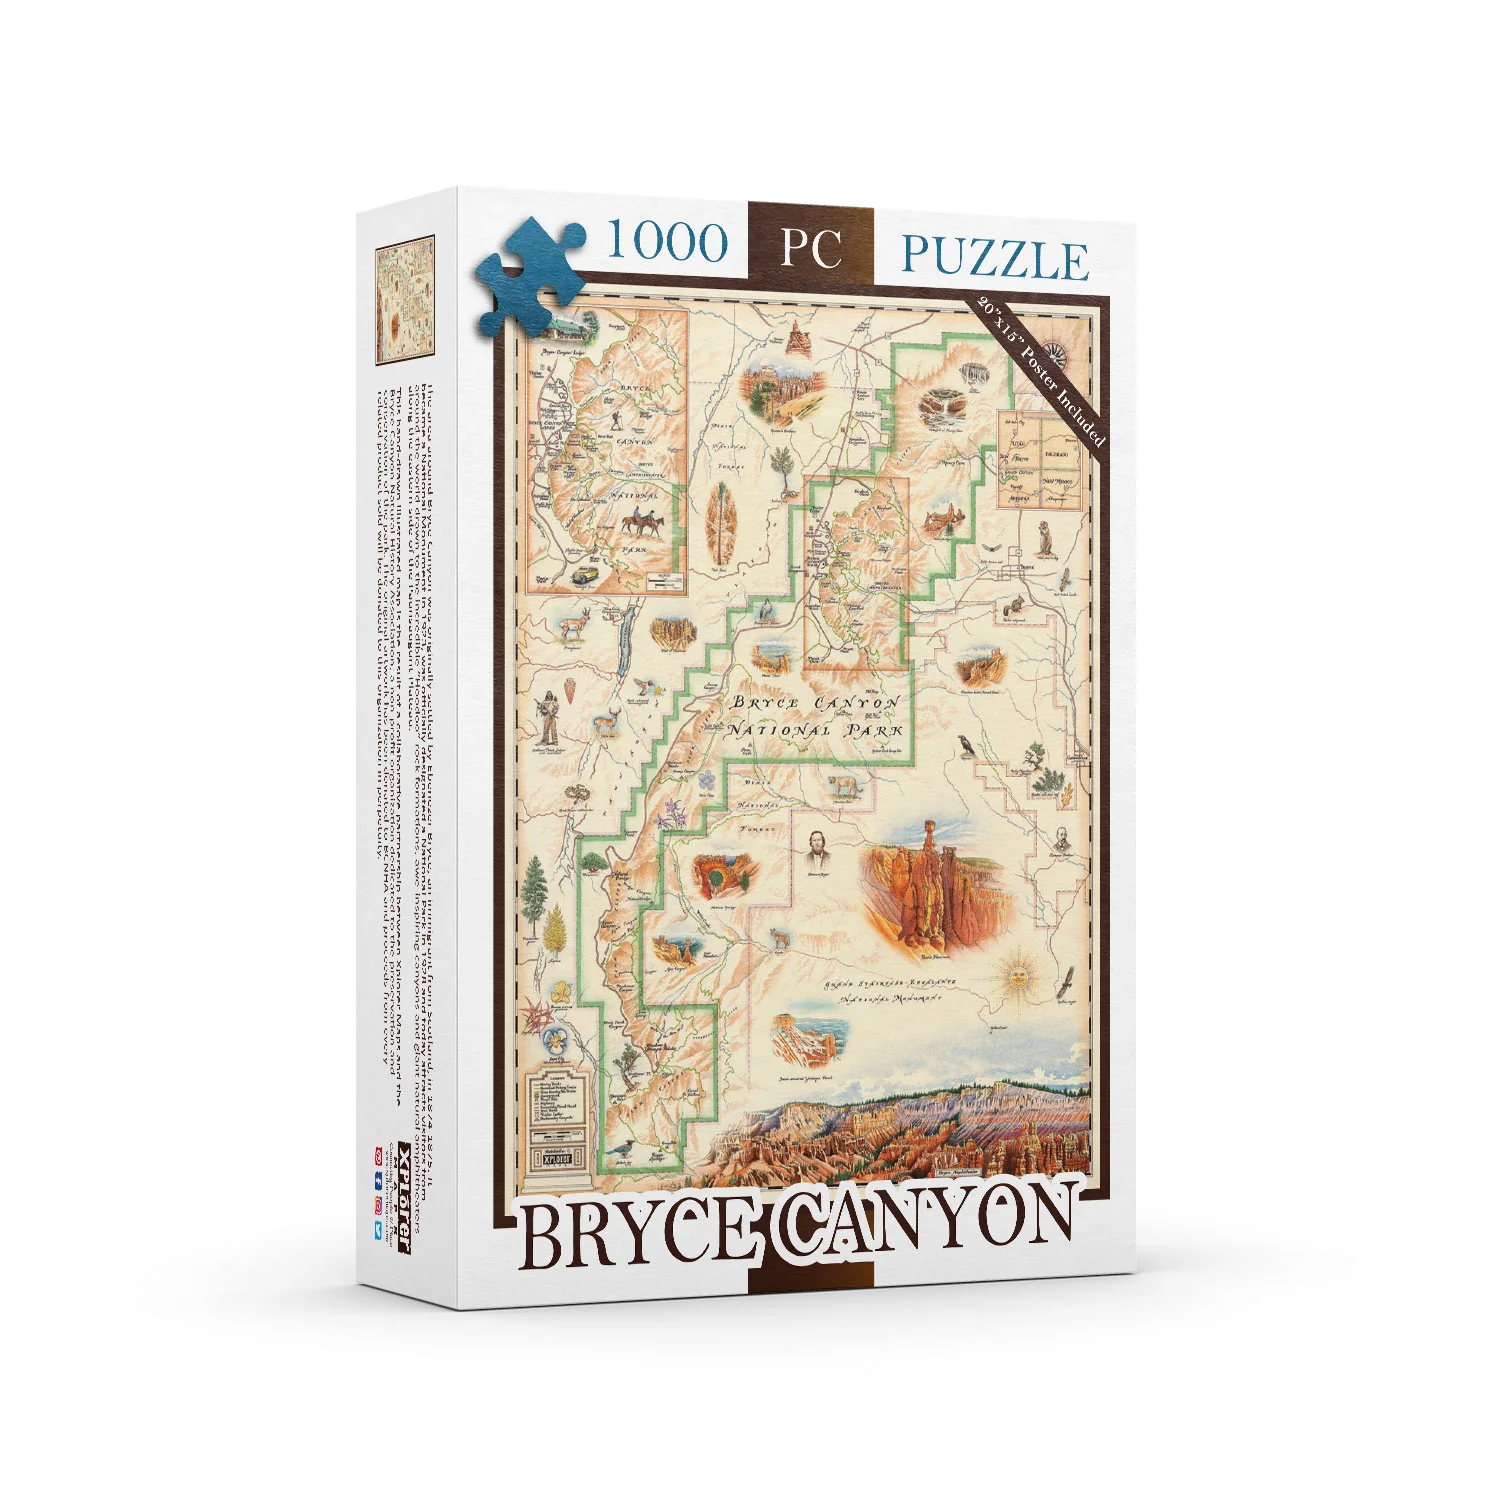 Bryce canyon puzzle